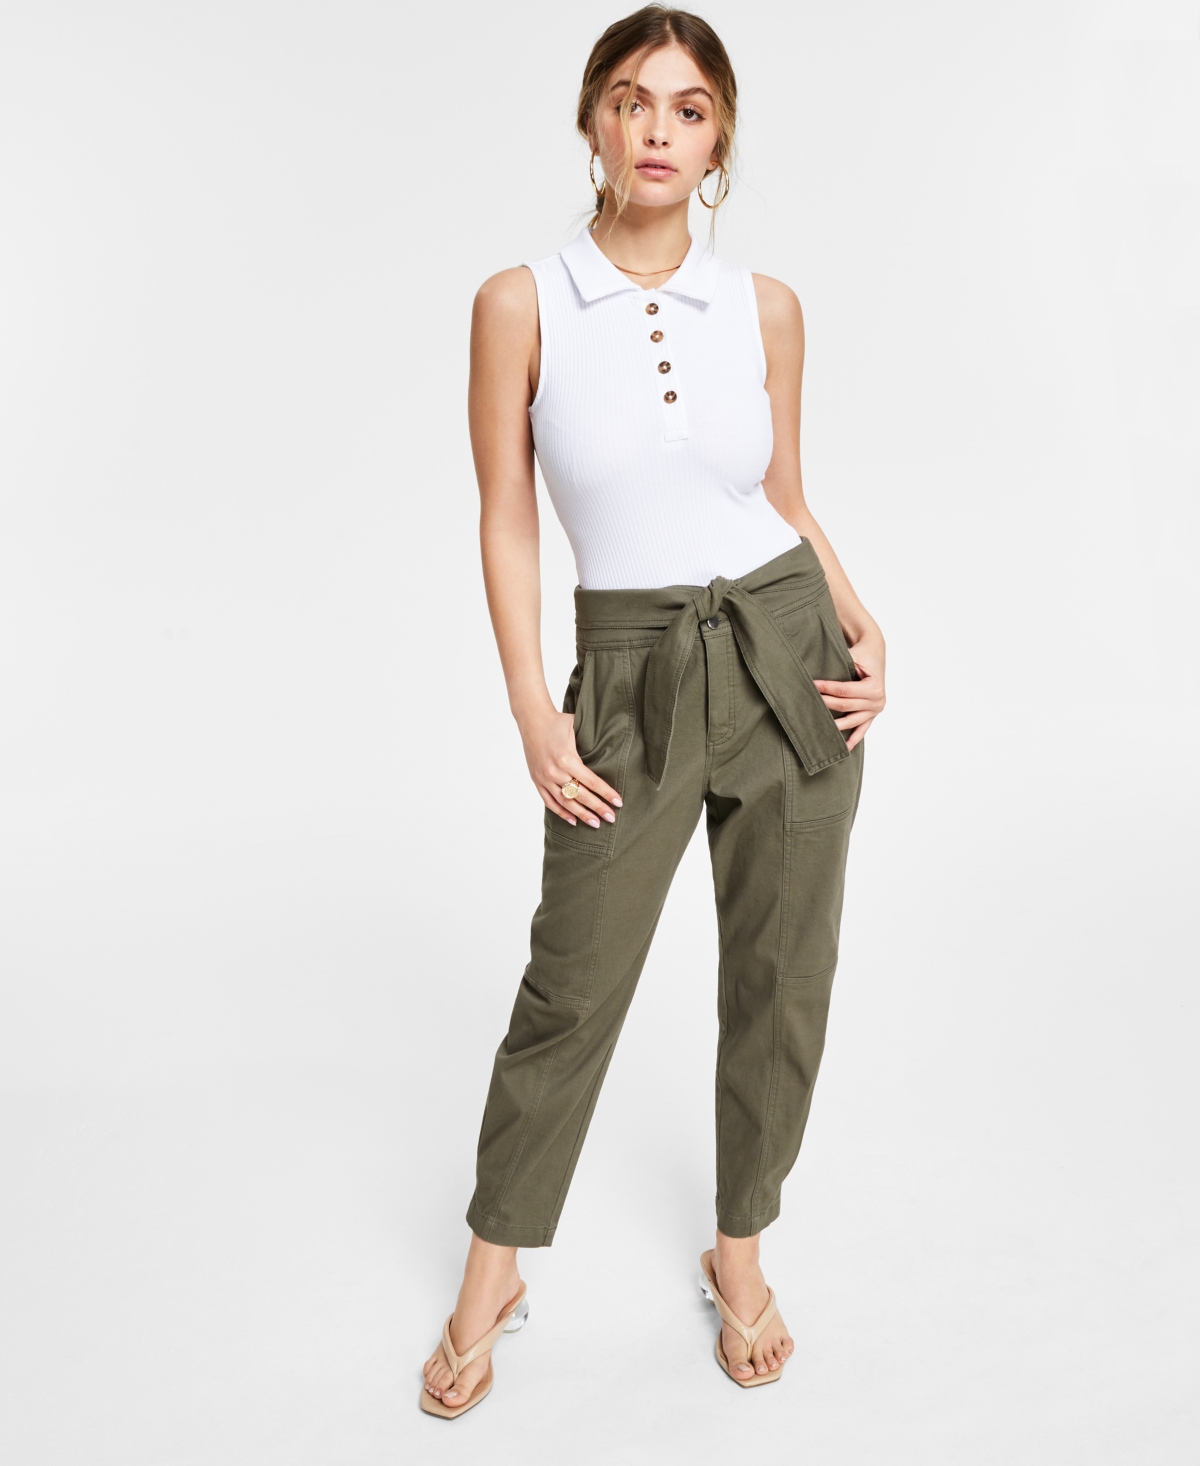  Bar Iii Tie-Front Tapered Pants, Created for Macy's